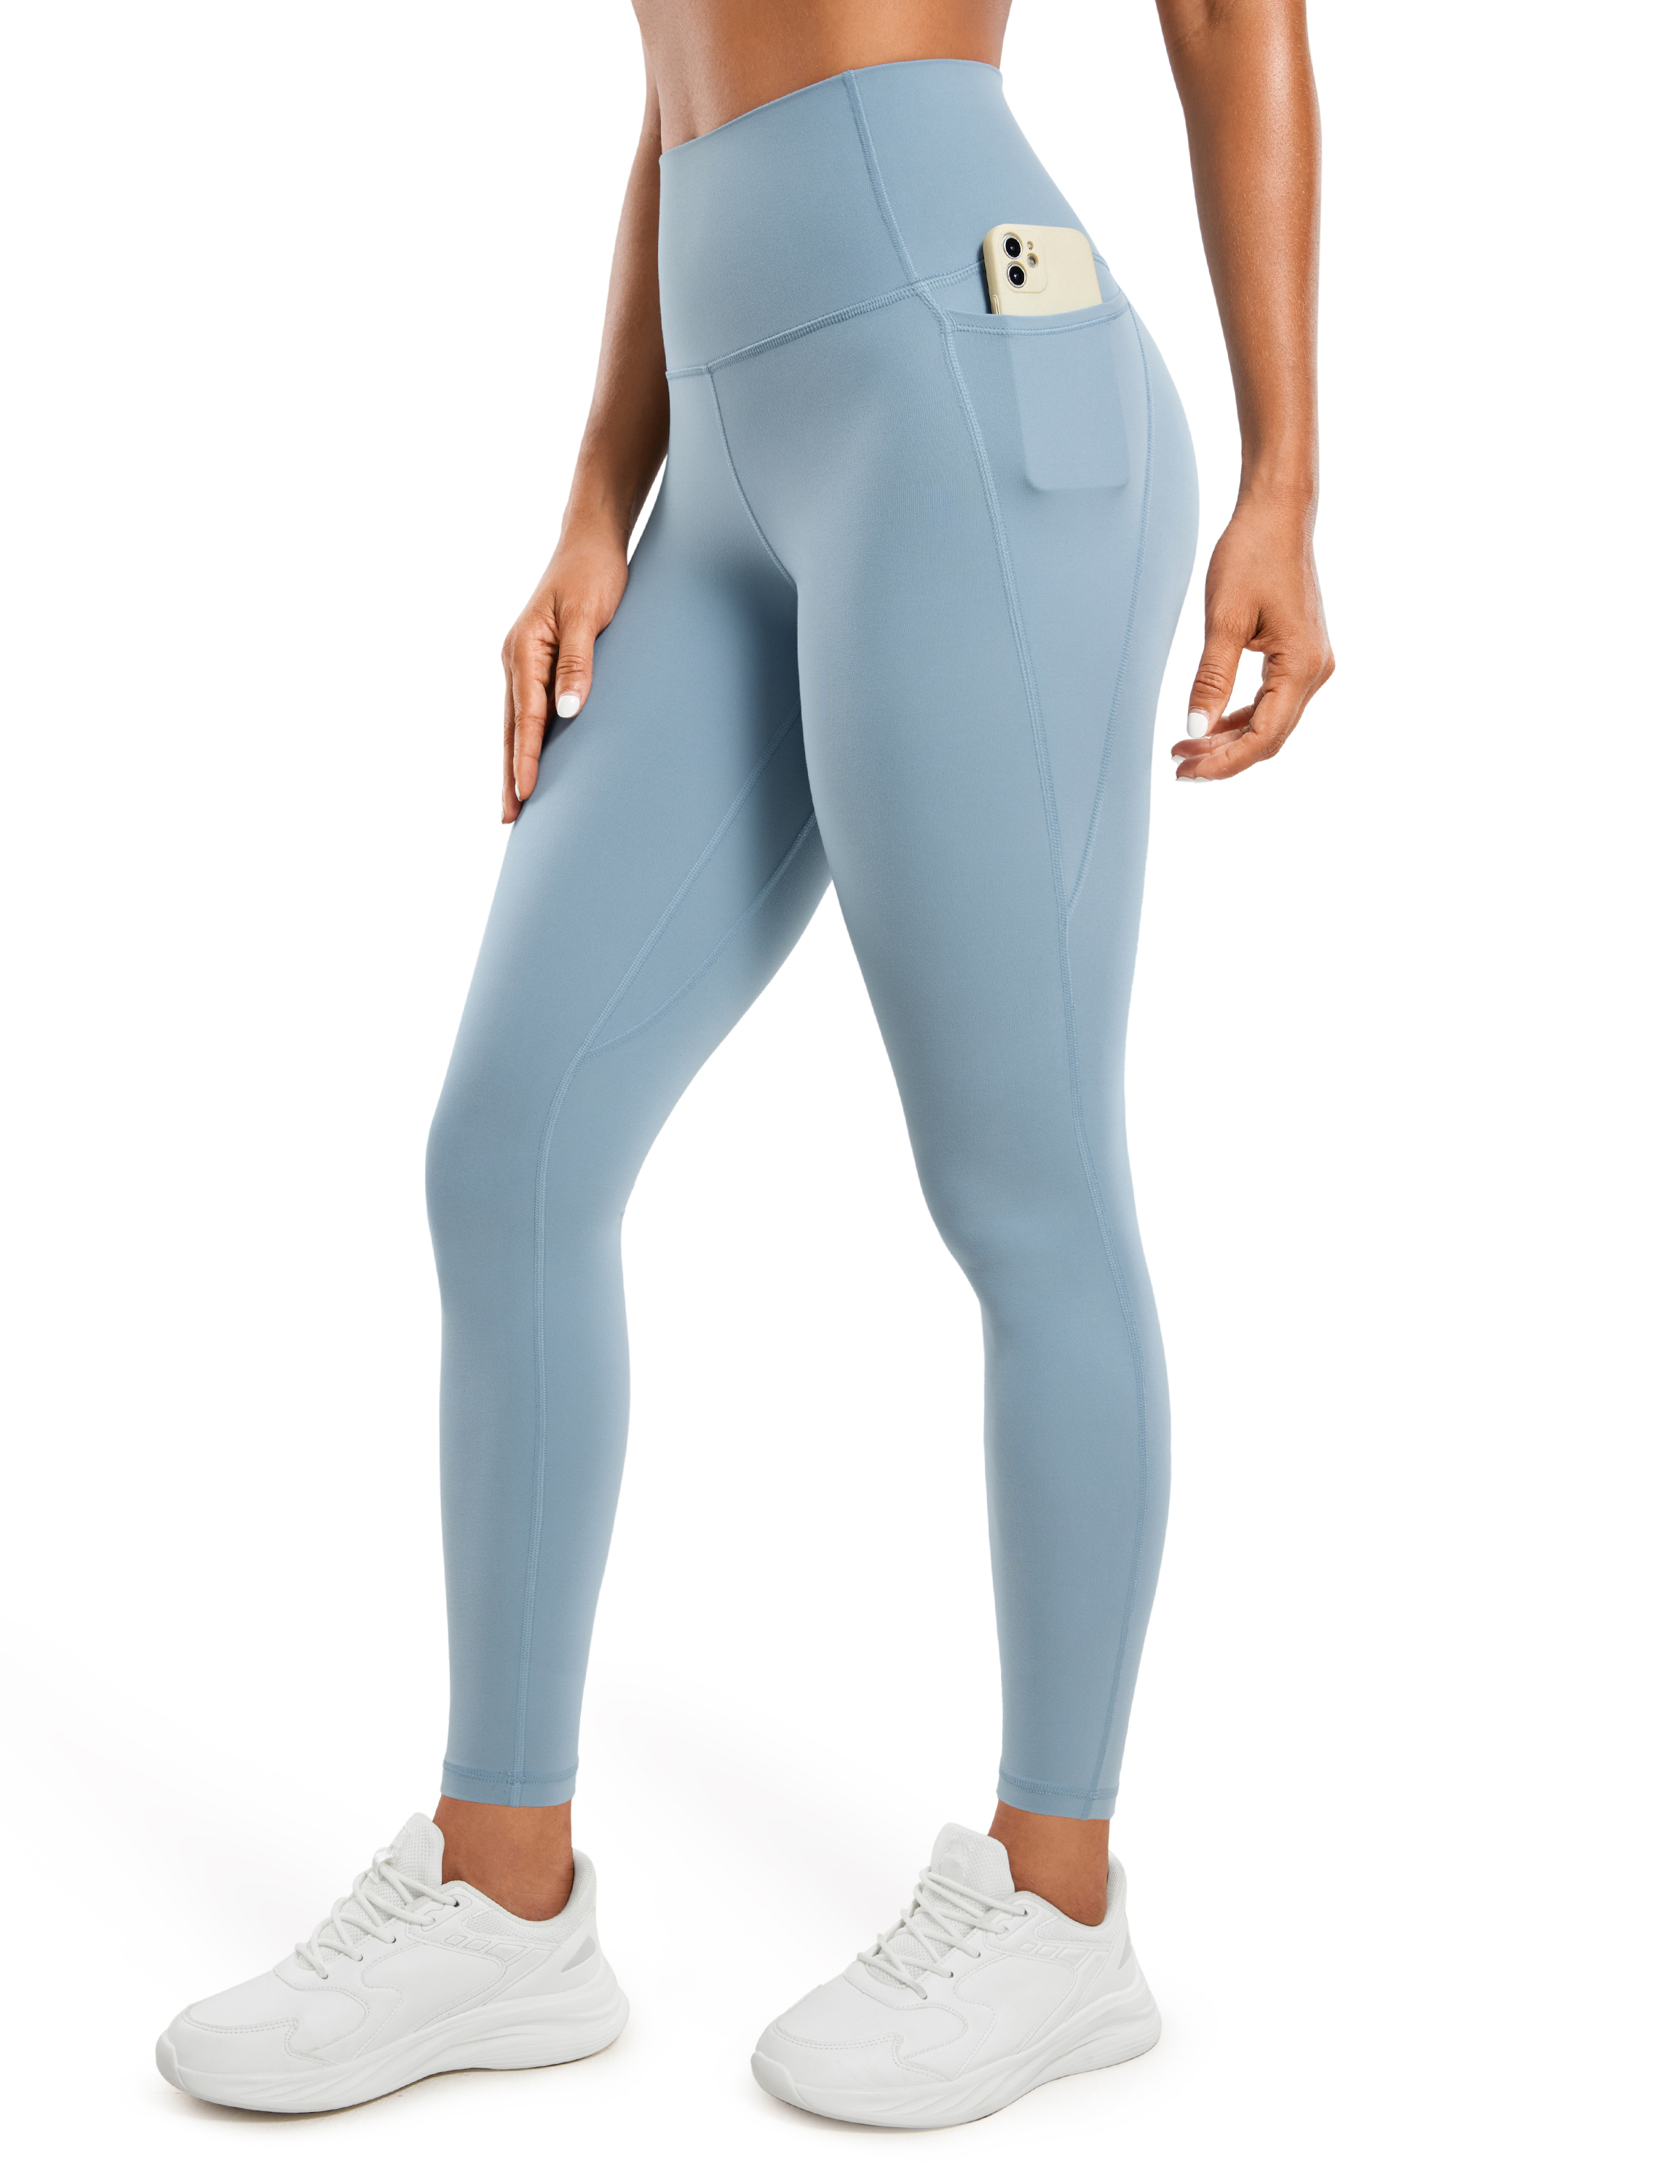 CRZ YOGA Womens Butterluxe Workout Leggings 28 inches High Waisted